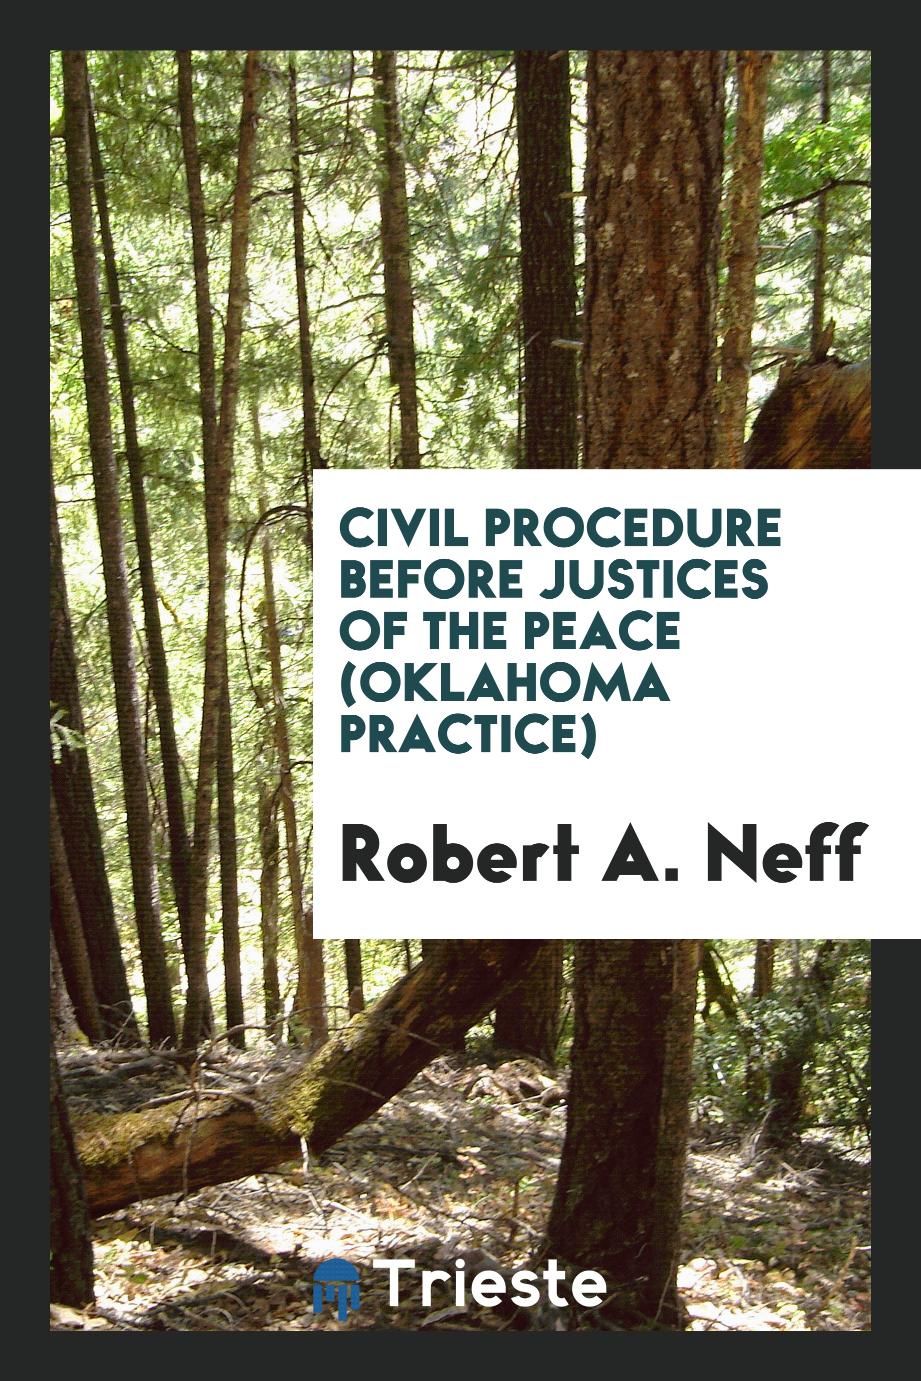 Civil Procedure Before Justices of the Peace (Oklahoma Practice)